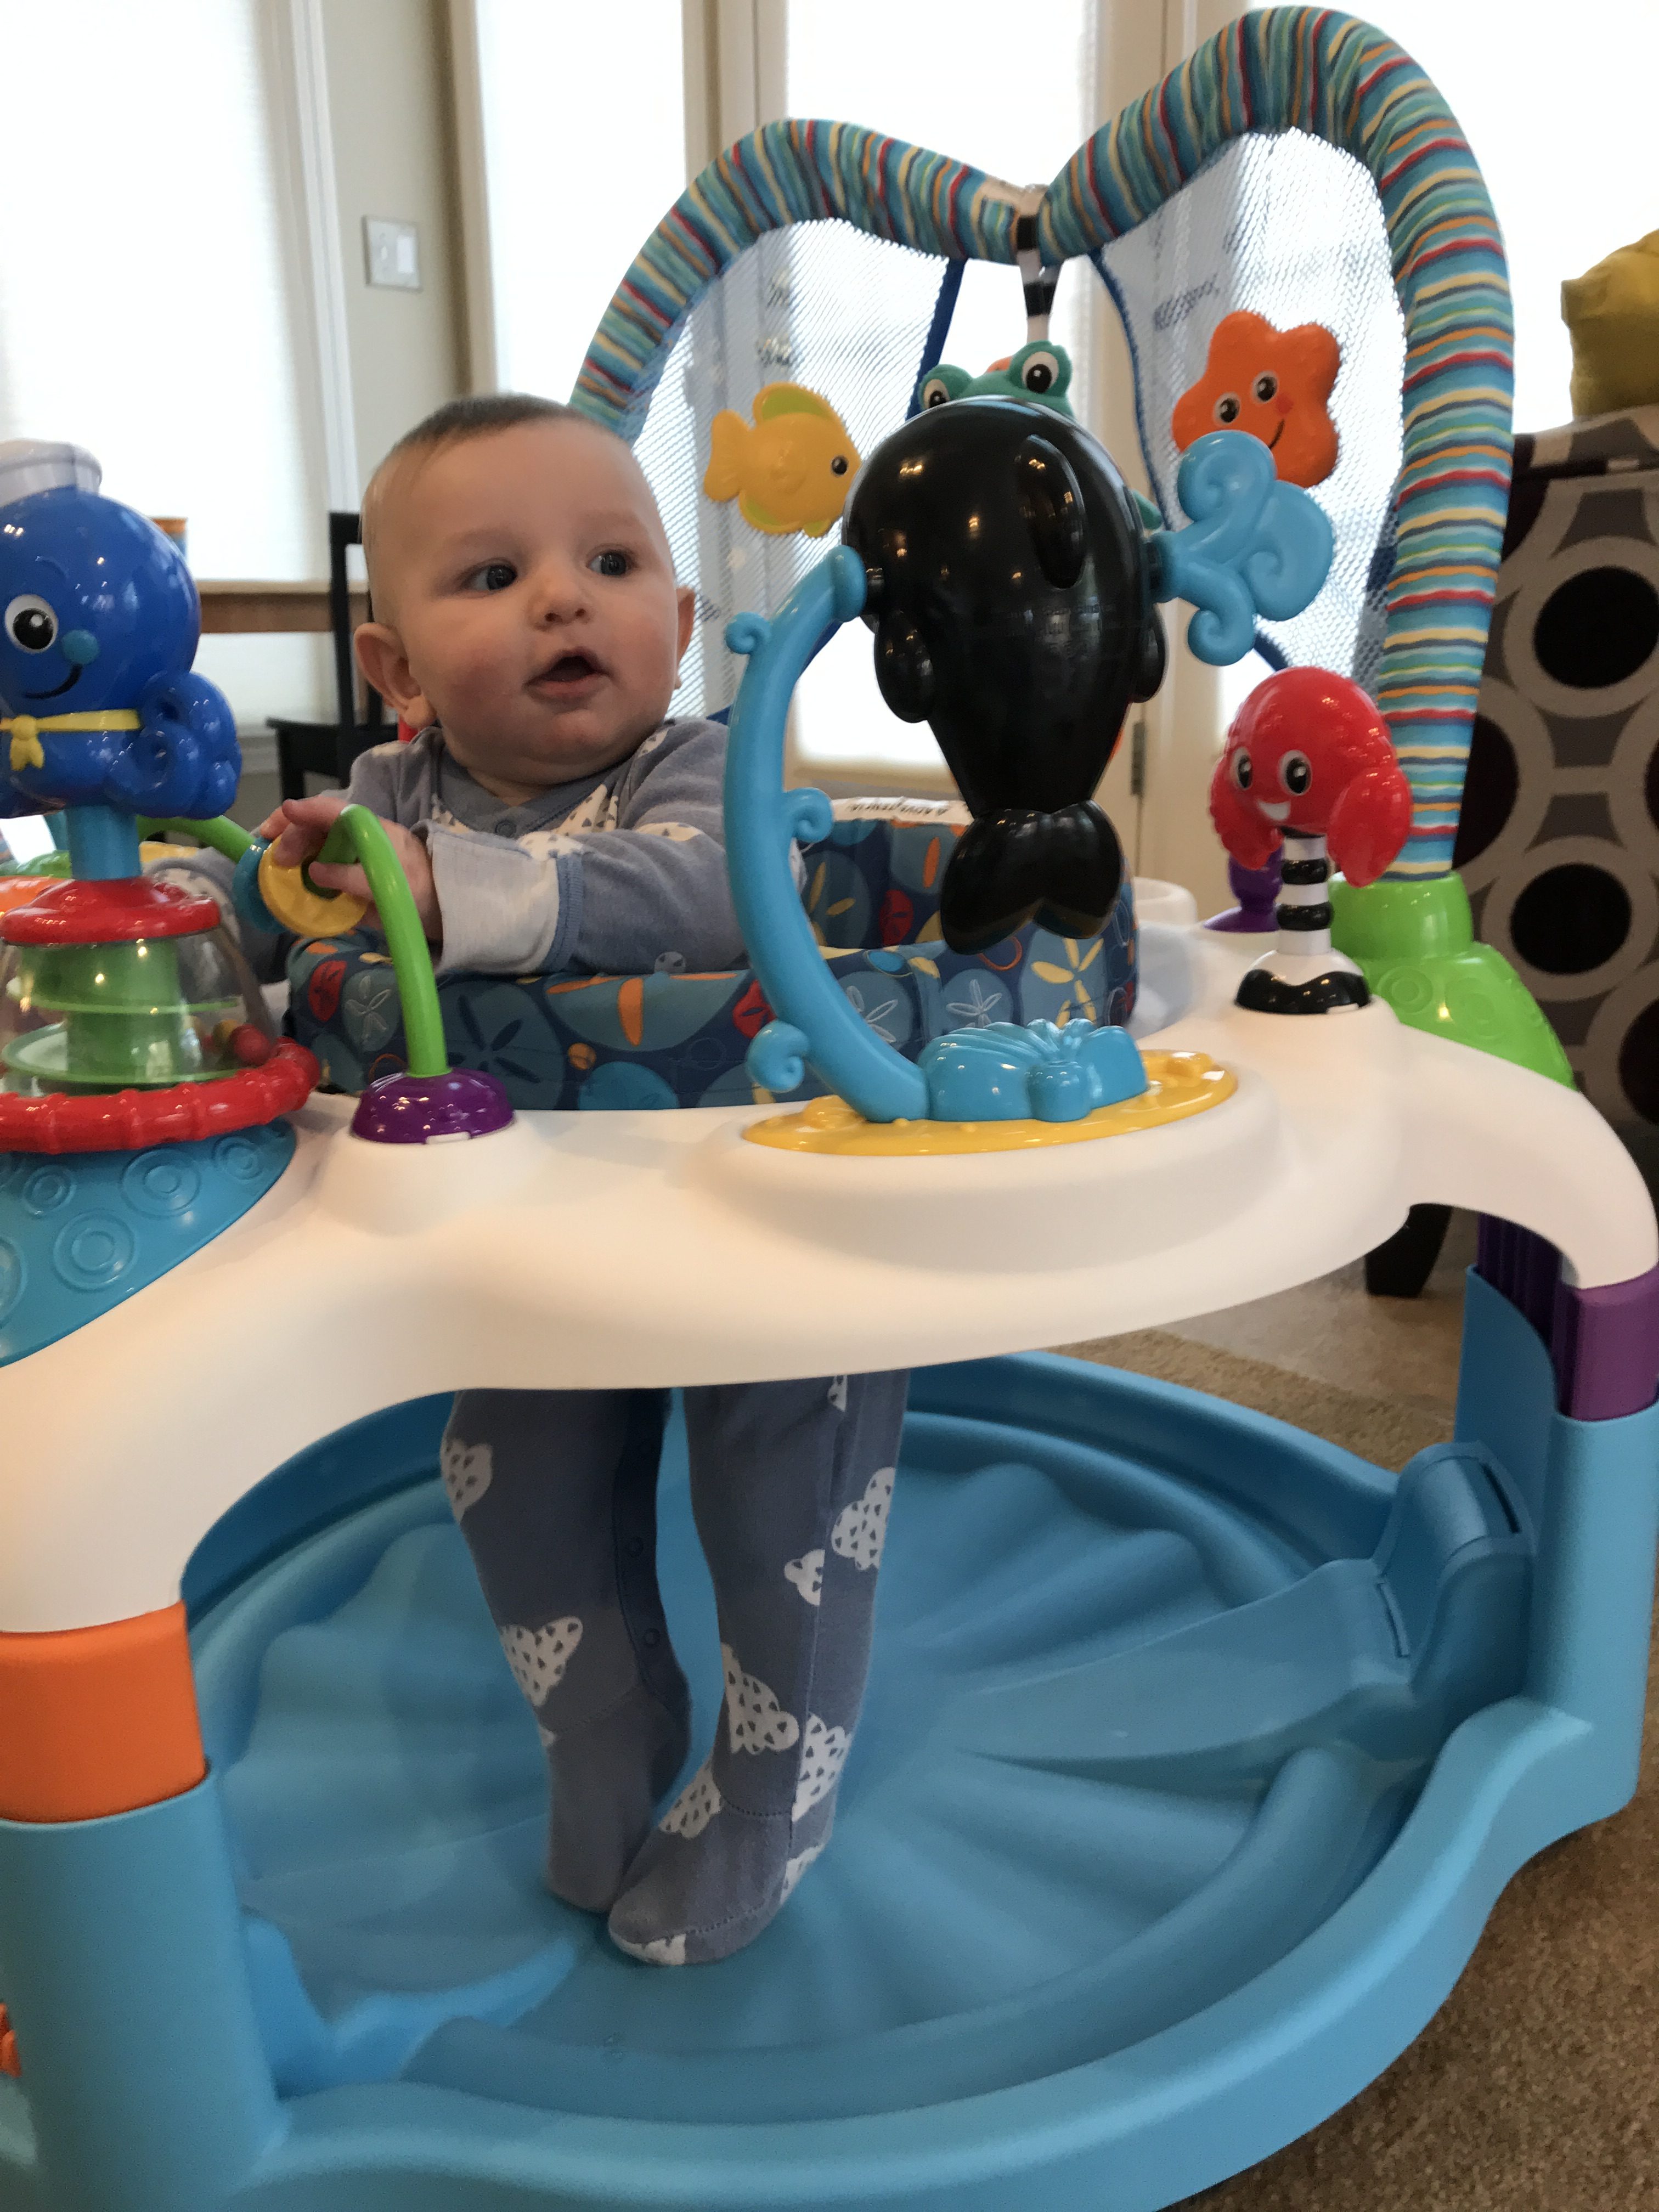 what age to use exersaucer